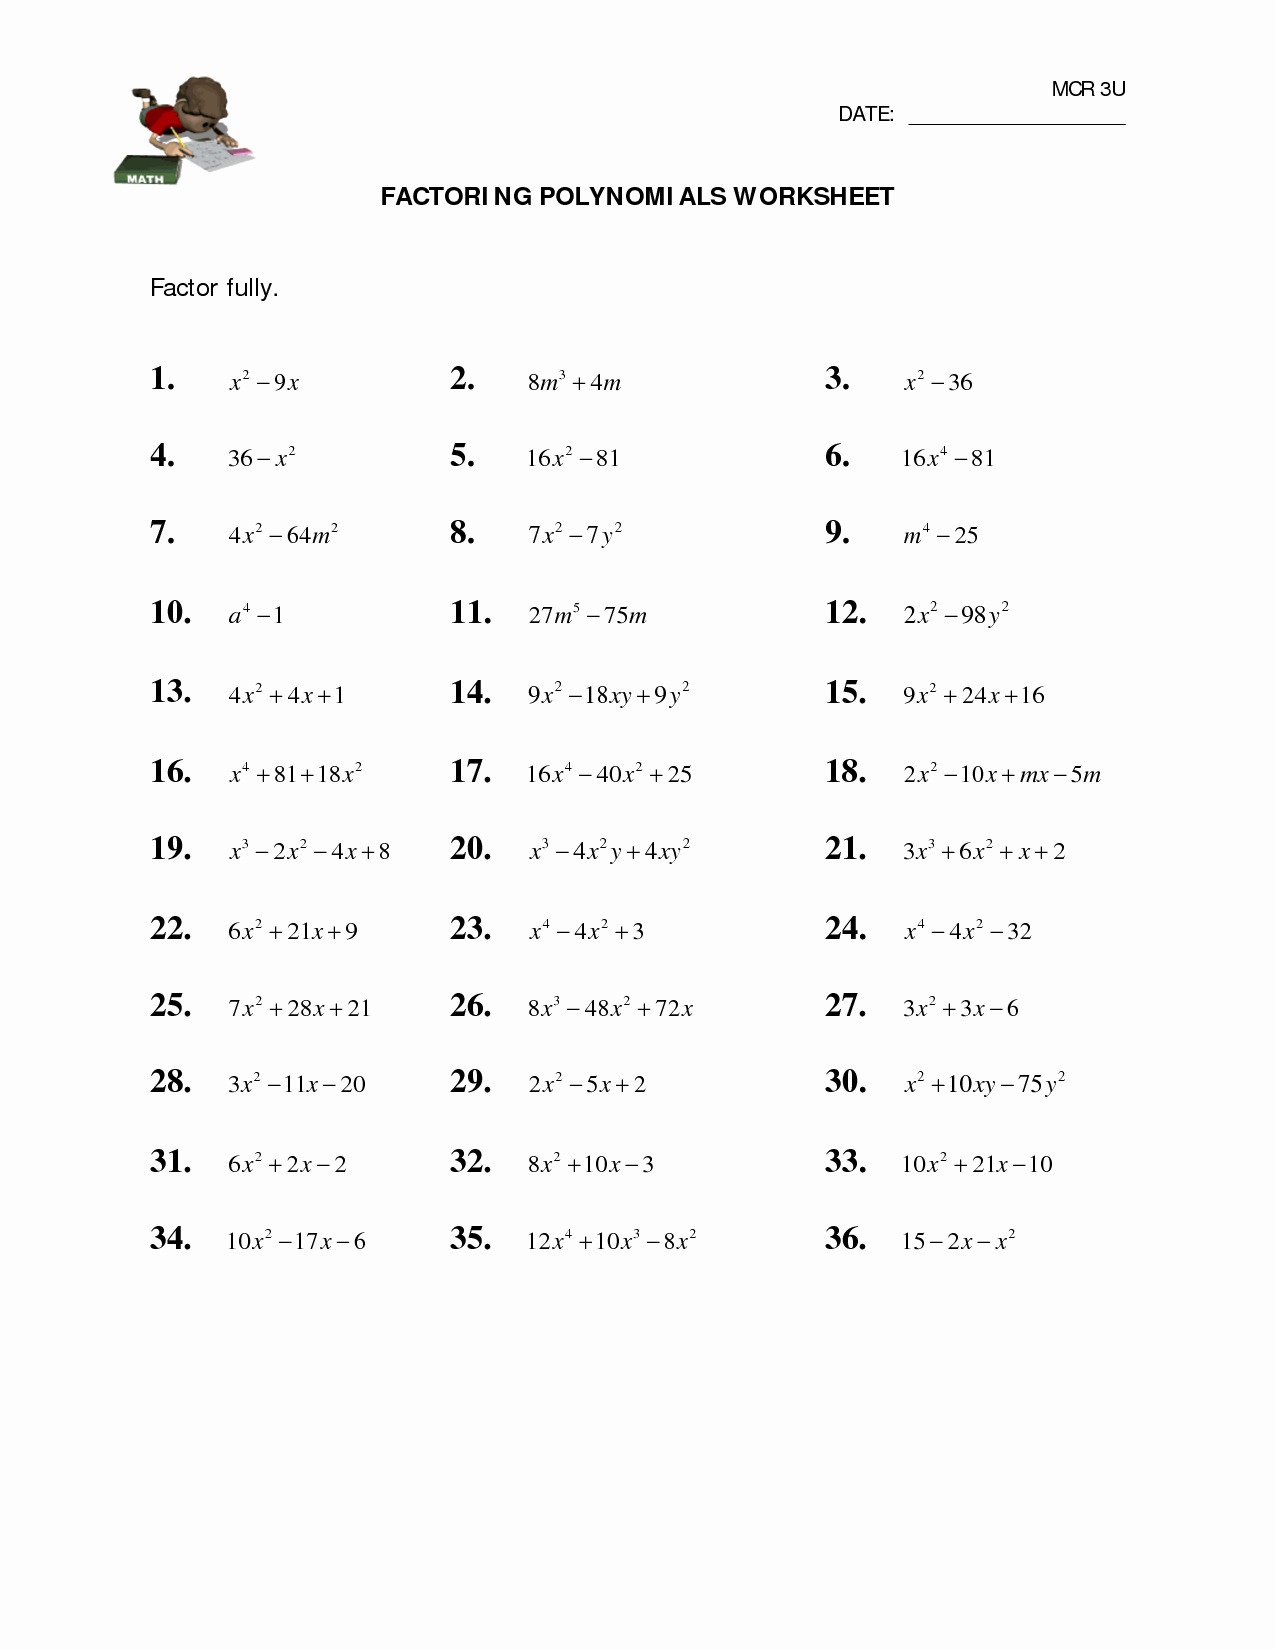 Factoring Worksheet with Answers Luxury 10 Best Of Factoring Polynomials Practice Worksheet